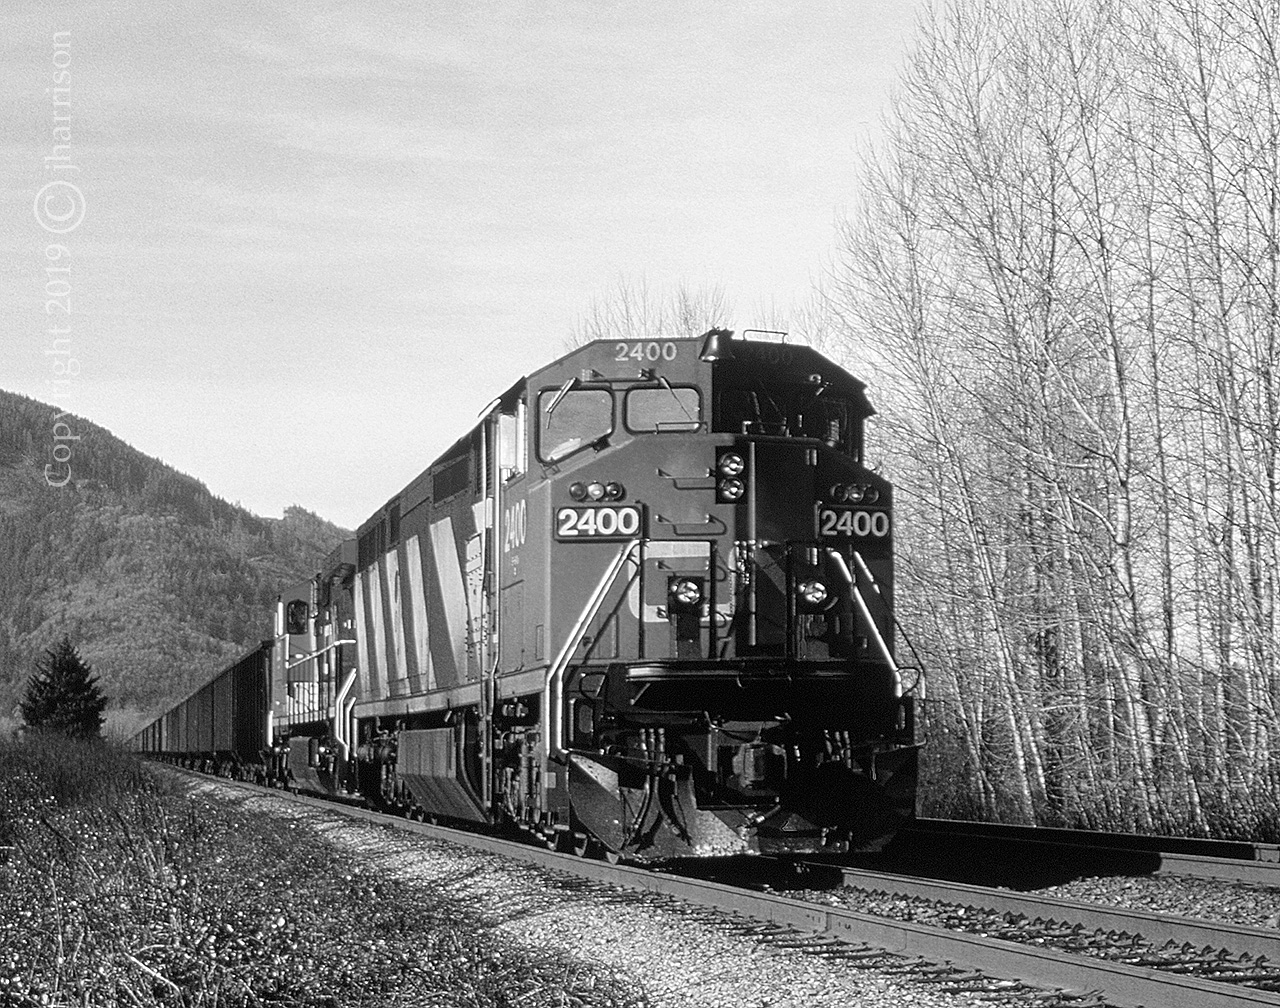 CN 2400, a GE Dash 8-40CM, with the 2521 trailing are in the siding at Arnold to let a westbound pass before continuing eastward and eventually up and through the Fraser & Thompson canyons.